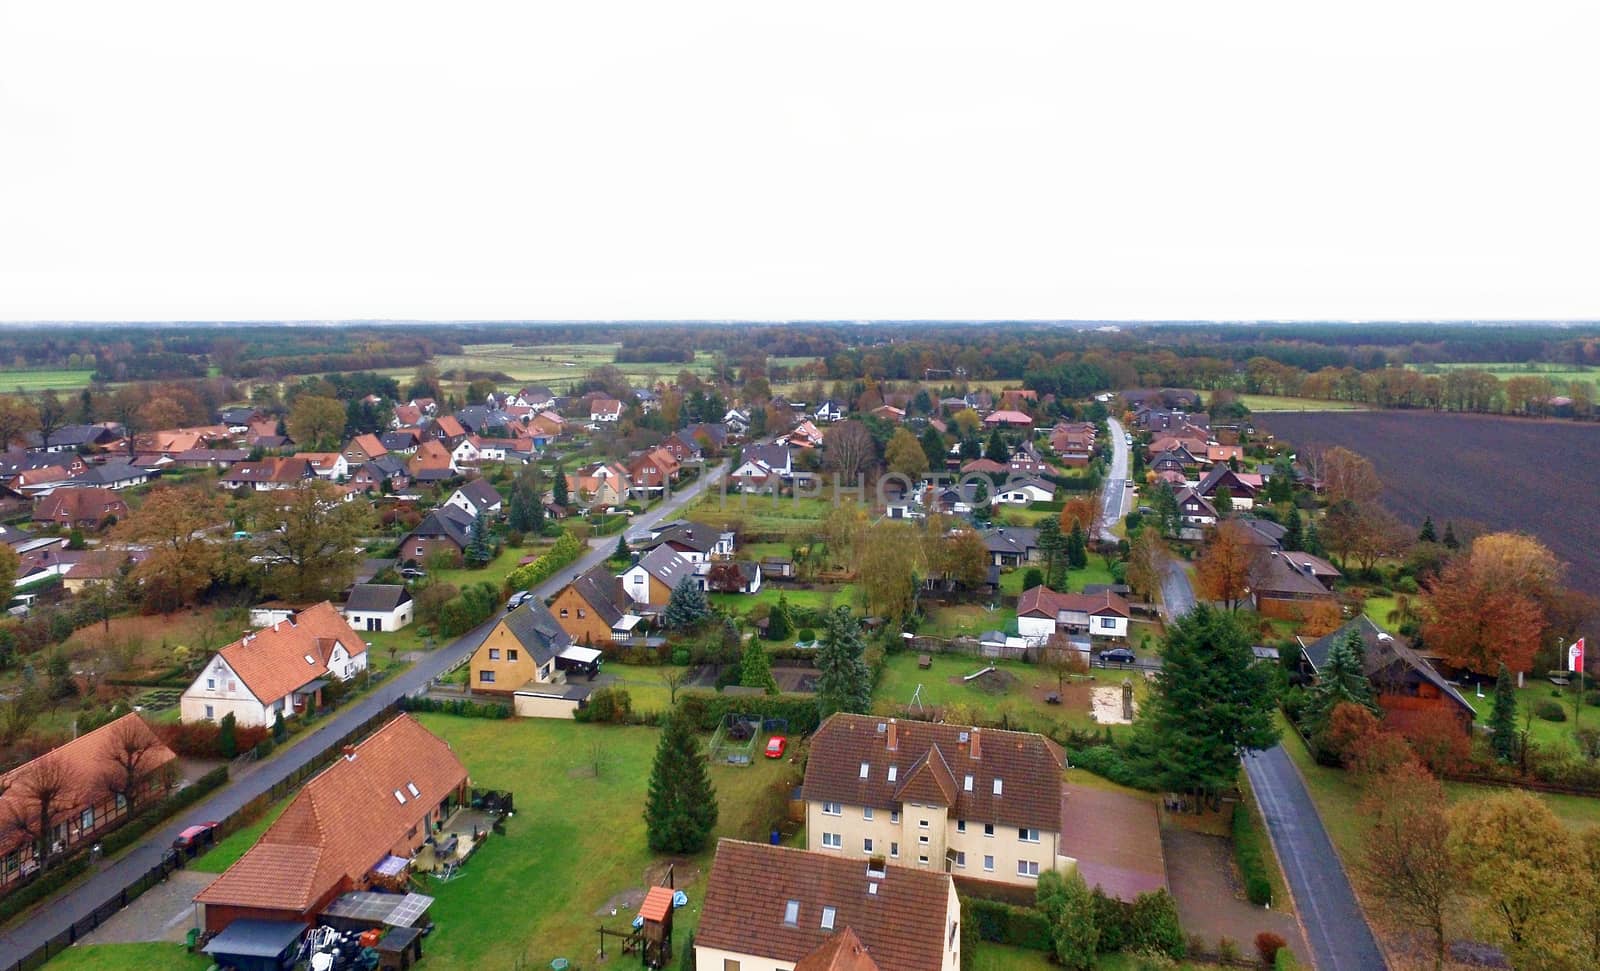 Aerial view of a suburb in Germany with houses and gardens by geogif